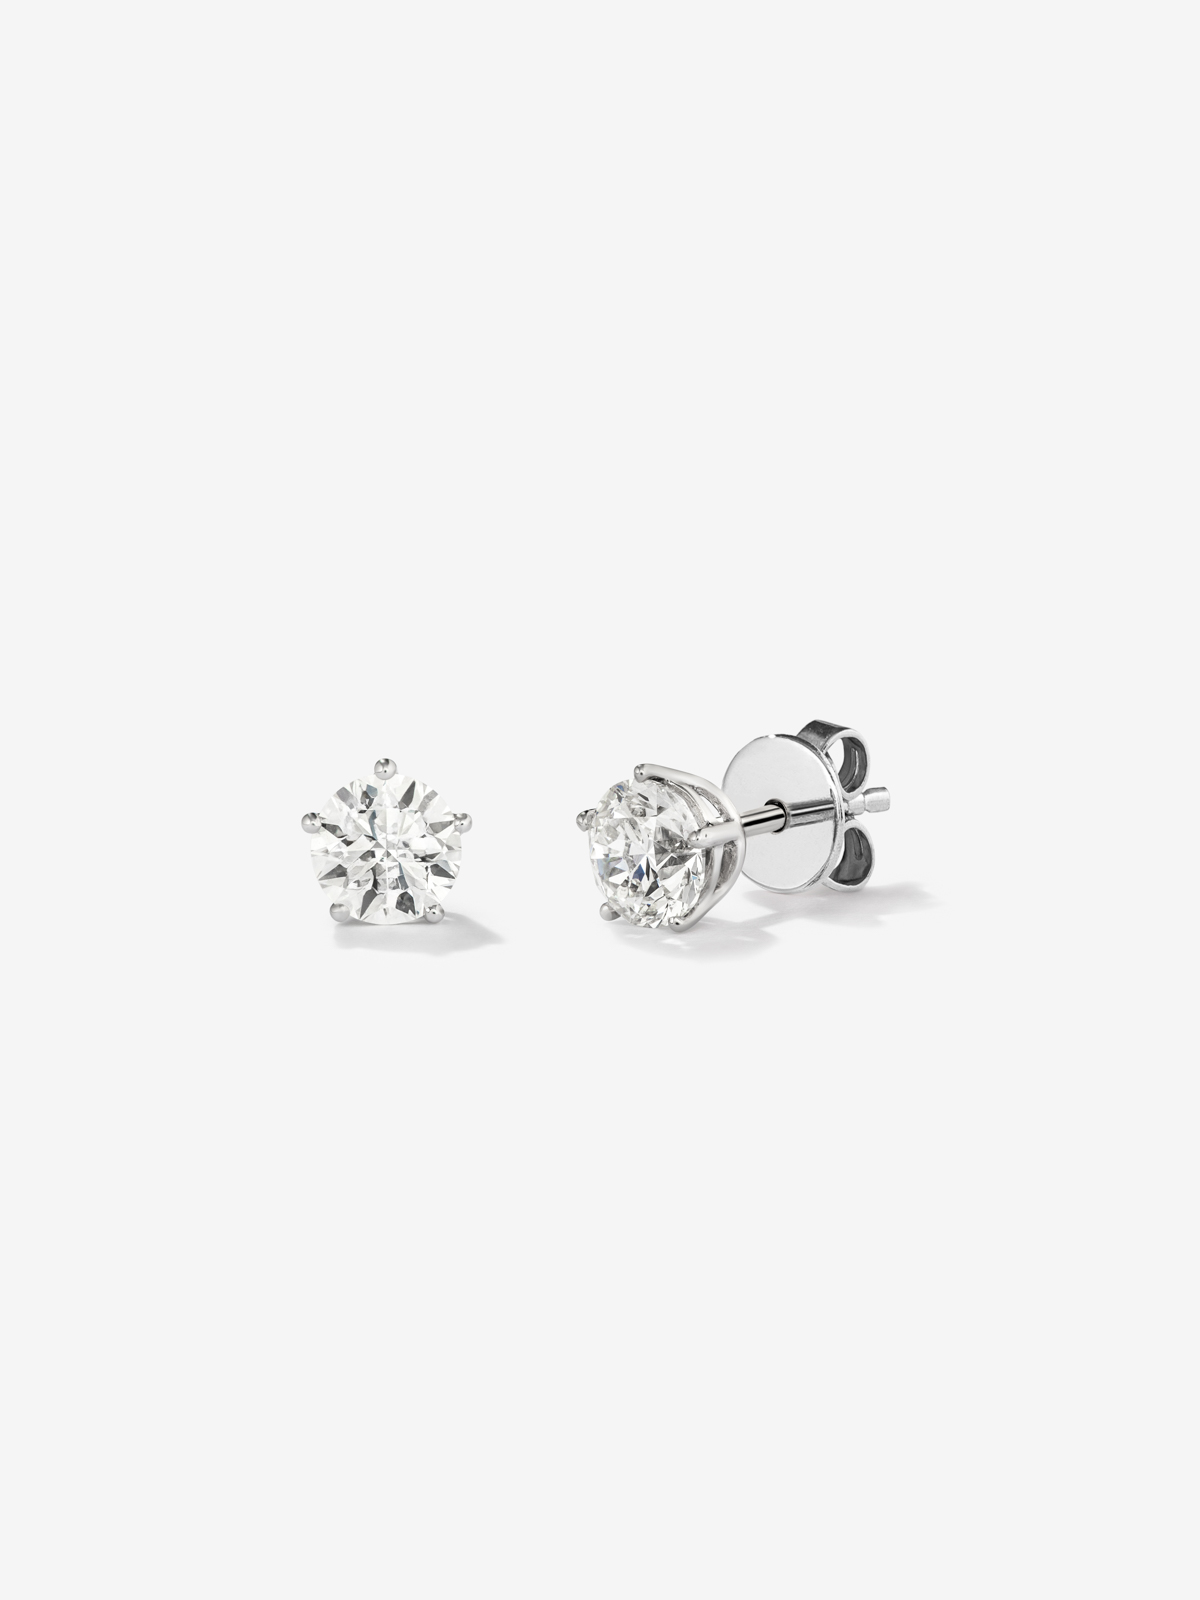 Solitary 18k white gold earrings with white diamonds of 0.6 cts